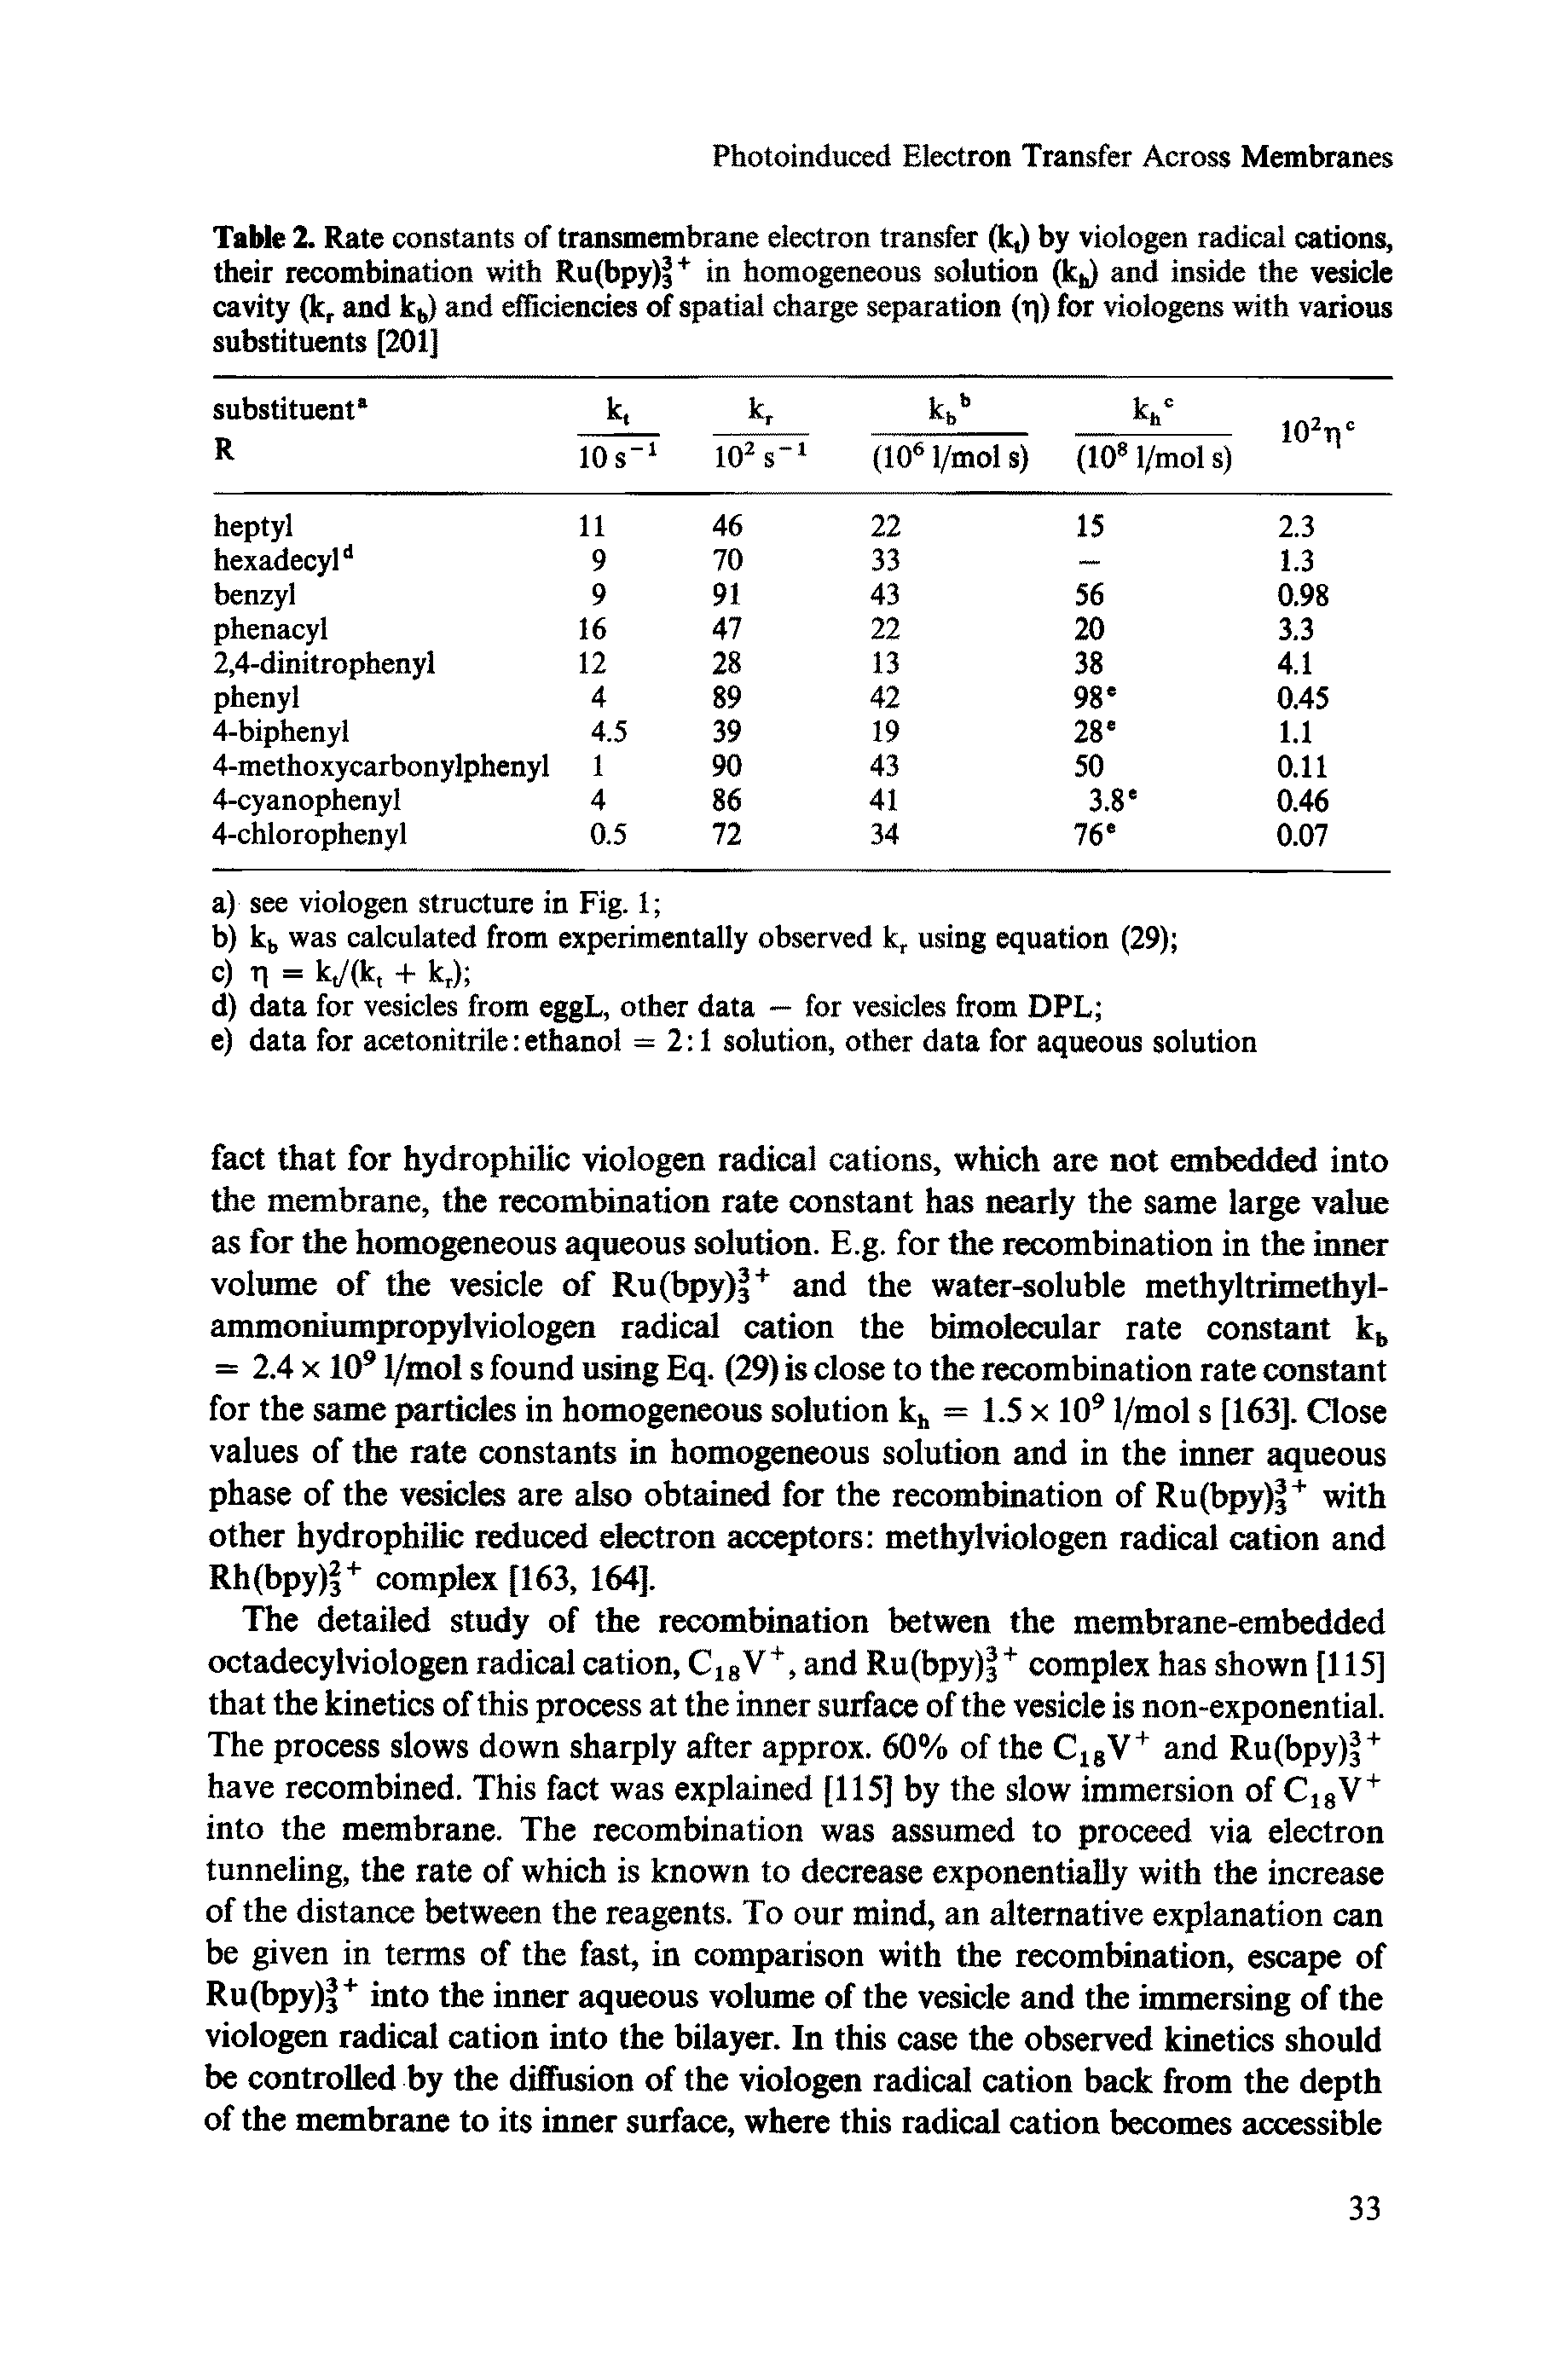 Table 2. Rate constants of transmembrane electron transfer (k,) by viologen radical cations, their recombination with Ru(bpy)j+ in homogeneous solution (k ) and inside the vesicle cavity (kr and kb) and efficiencies of spatial charge separation (t ) for viologens with various substituents [201]...